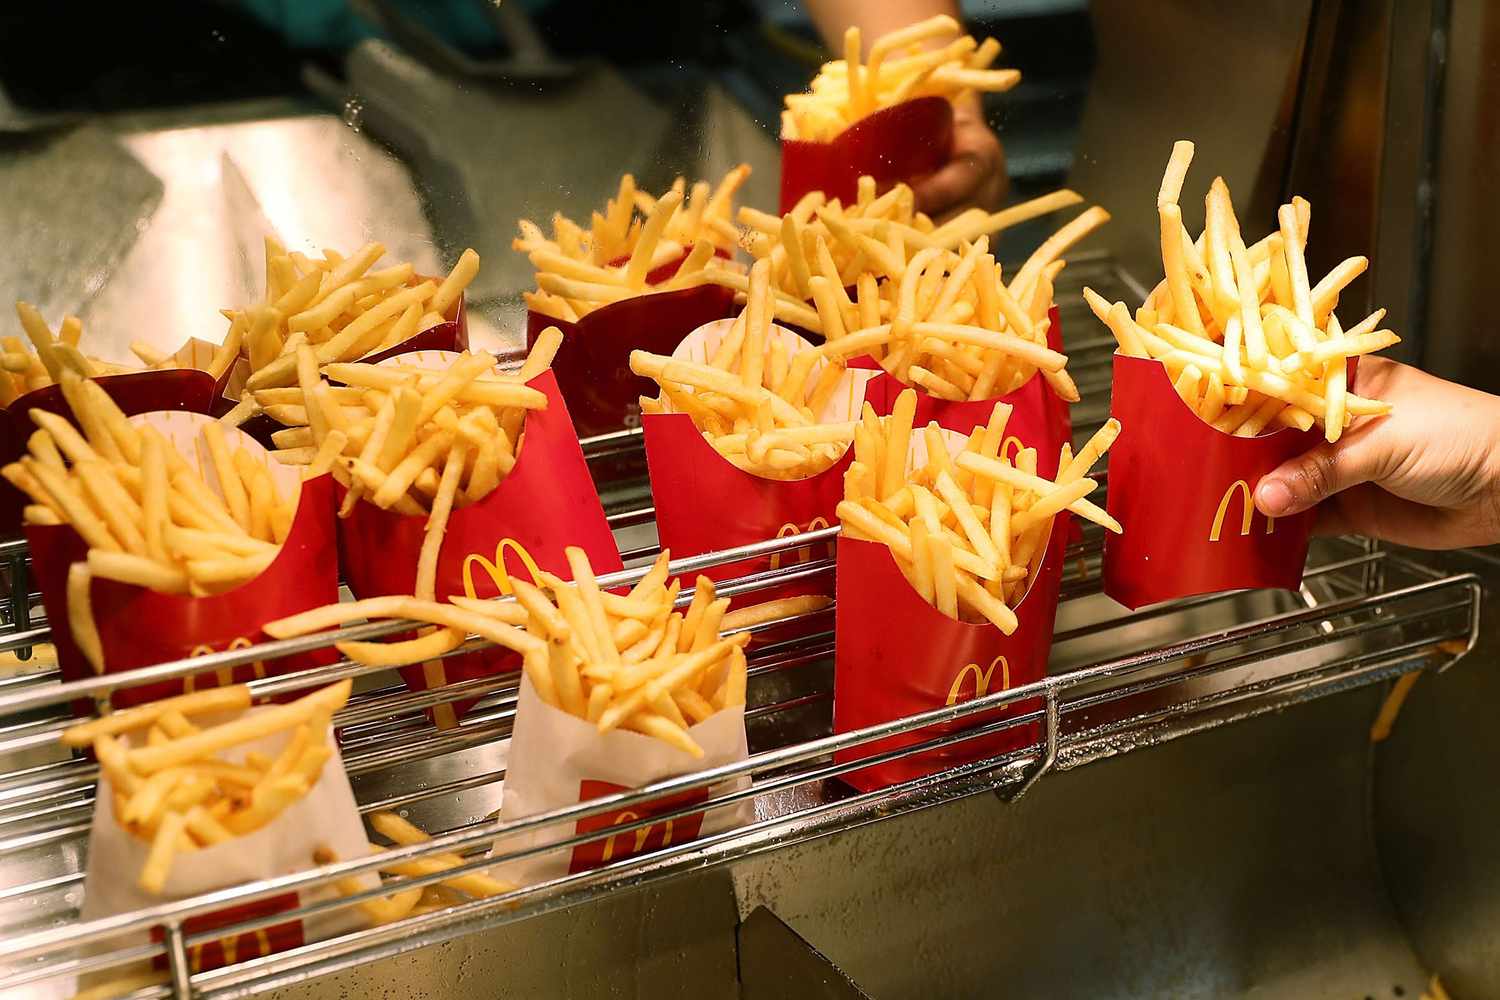 McDonald's Offers Free Fries To Celebrate National French Fry Day